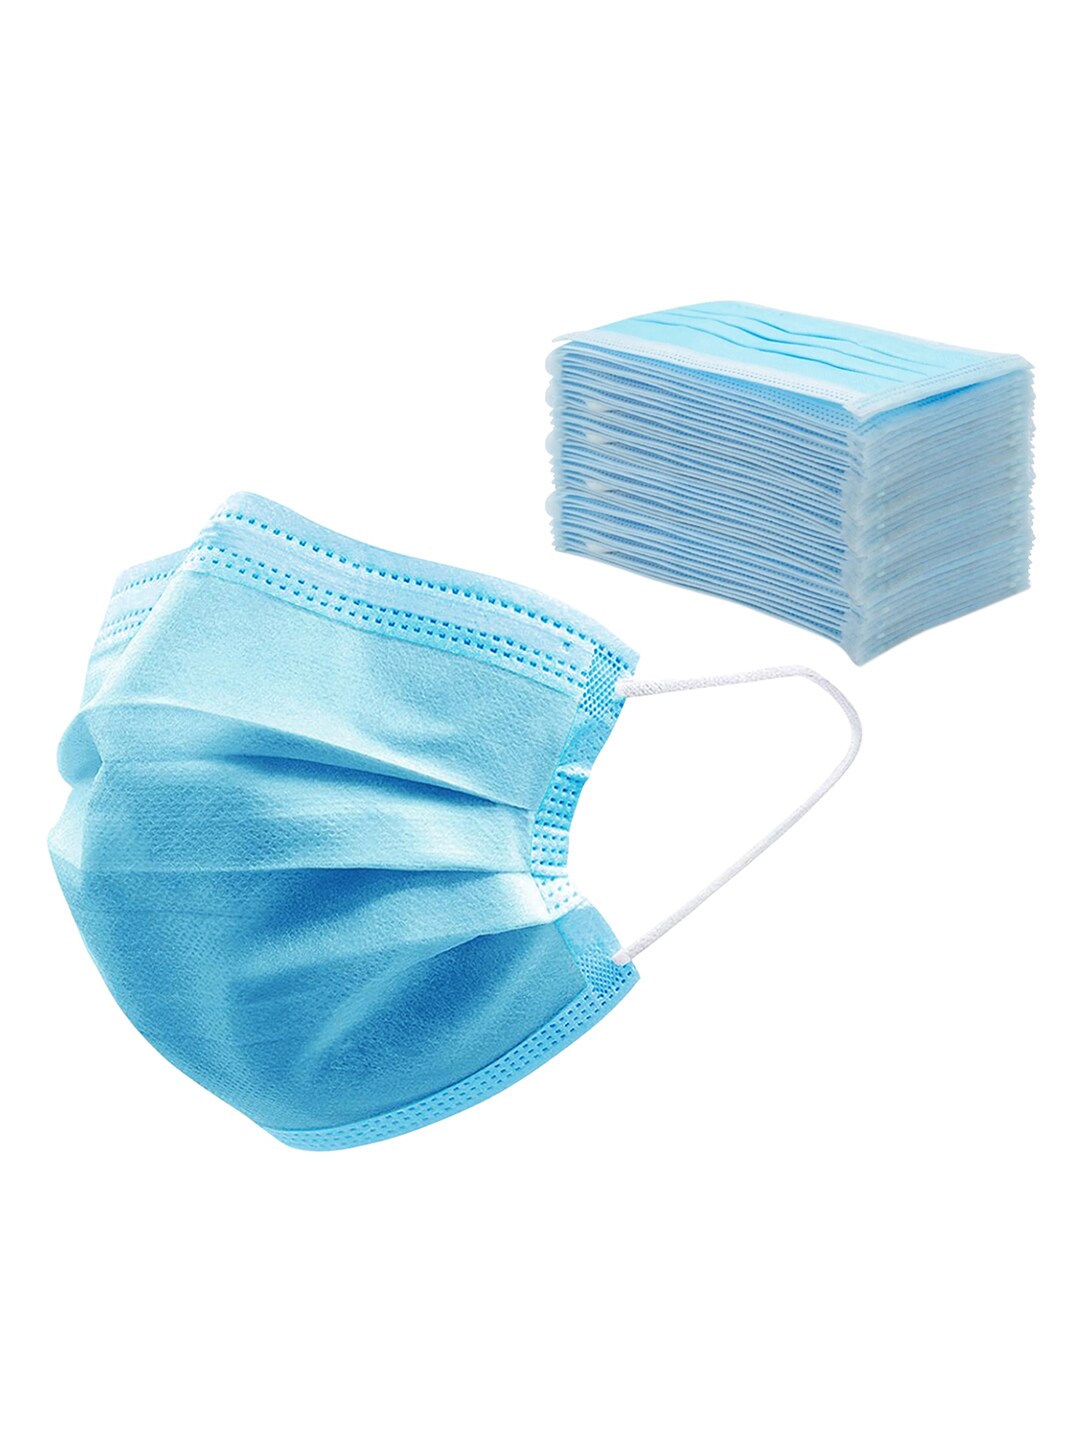 Story@home Unisex Blue 100 Pcs 3-Ply Single-Use Disposable Outdoor Masks Price in India